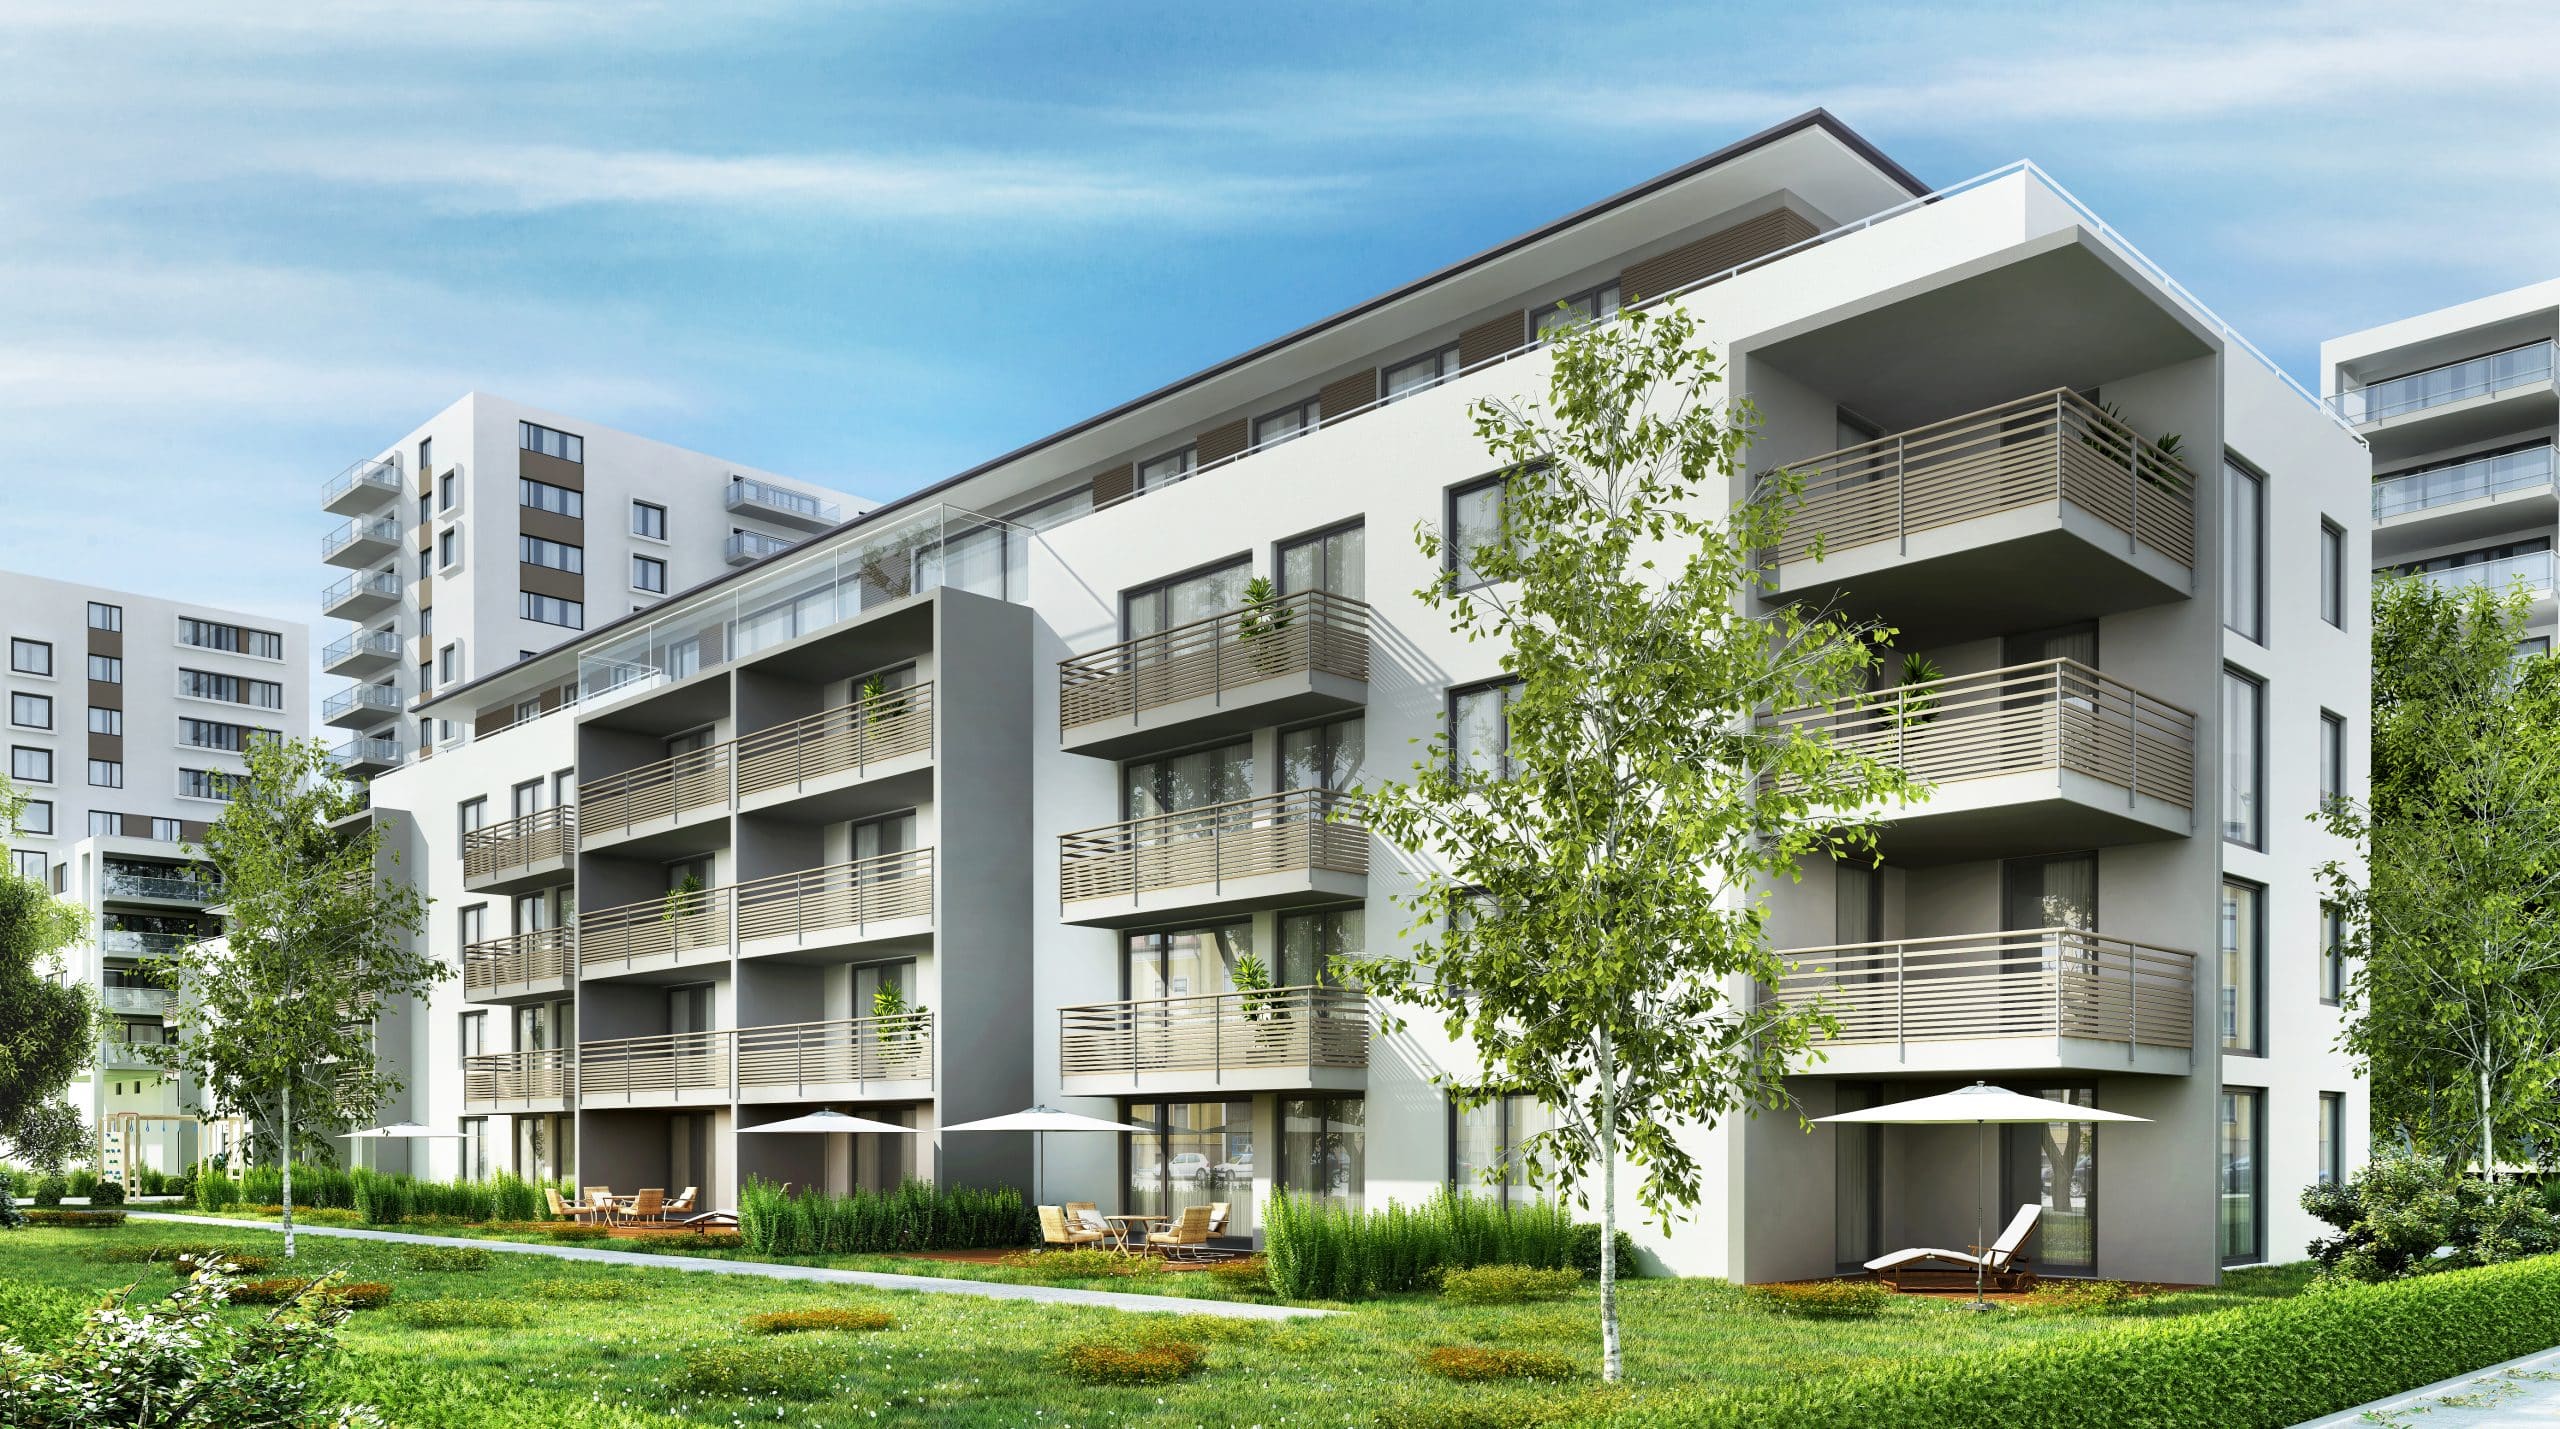 You're reading about six ways to invest in apartment buildings by Passive Income, MD. Pictured here is a modern apartment building, one example of a multifamily property.